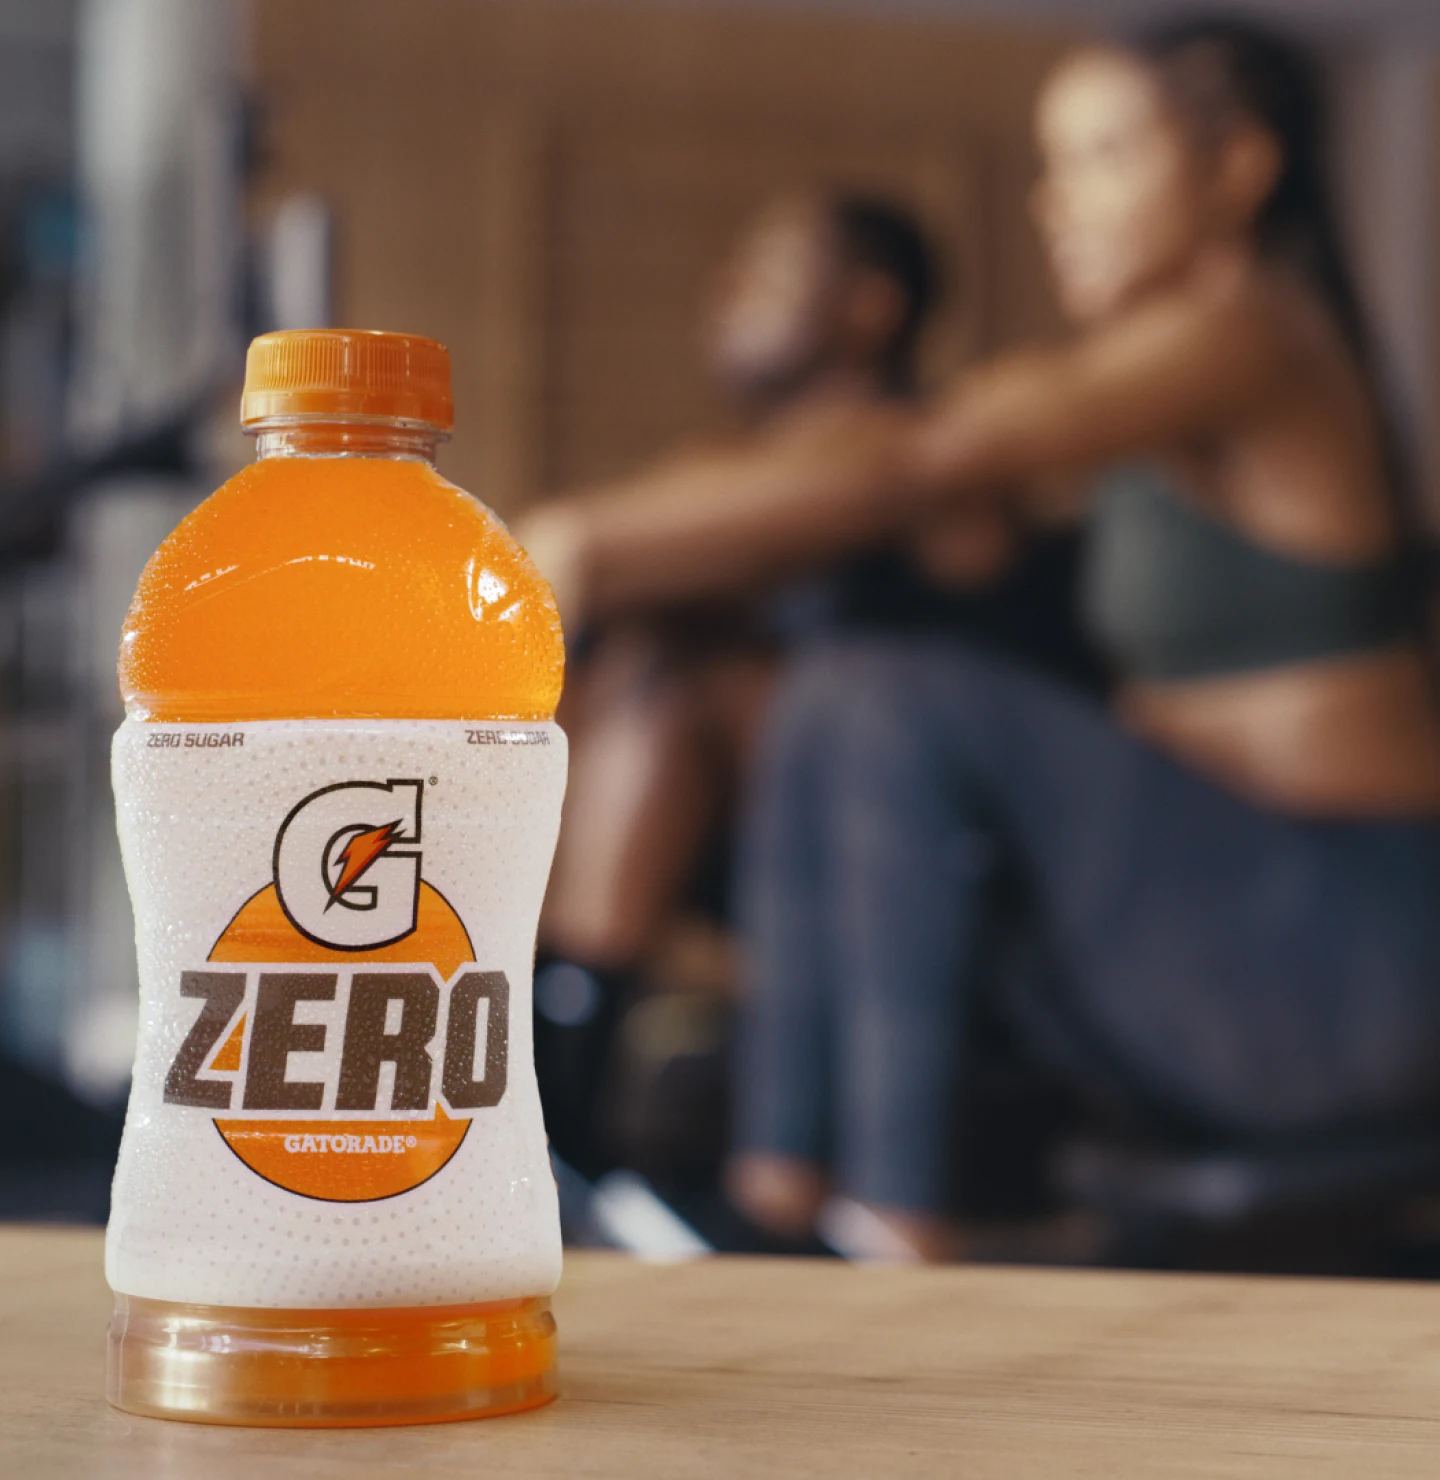 In the foreground, a bottle of orange-flavoured Gatorade Zero. In the background, two people in workout clothes are on rowing machines.  